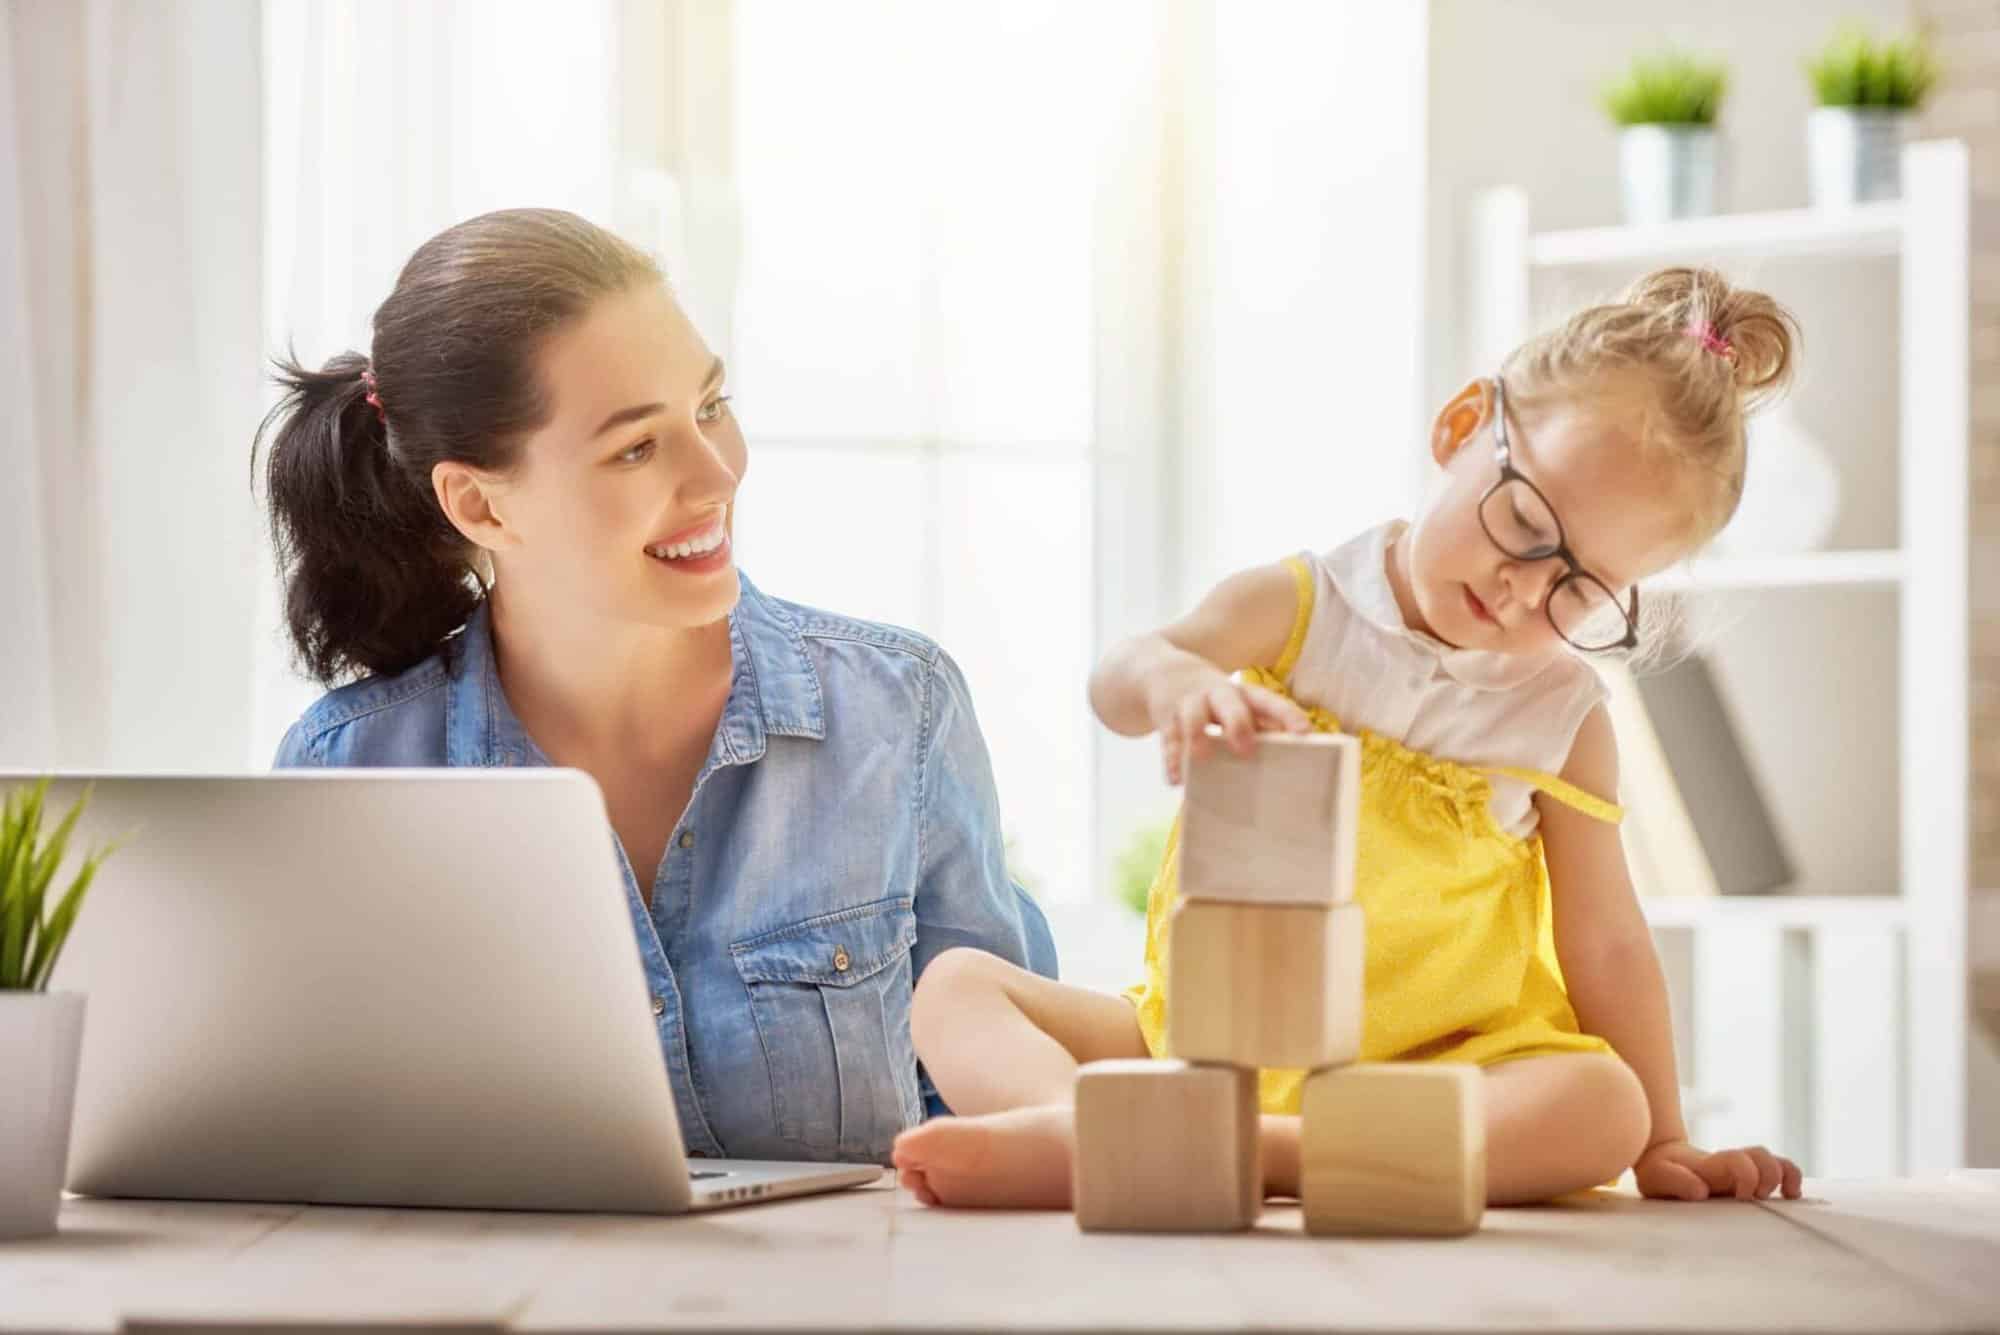 Working Moms – This is Your Greatest Edge to Thrive